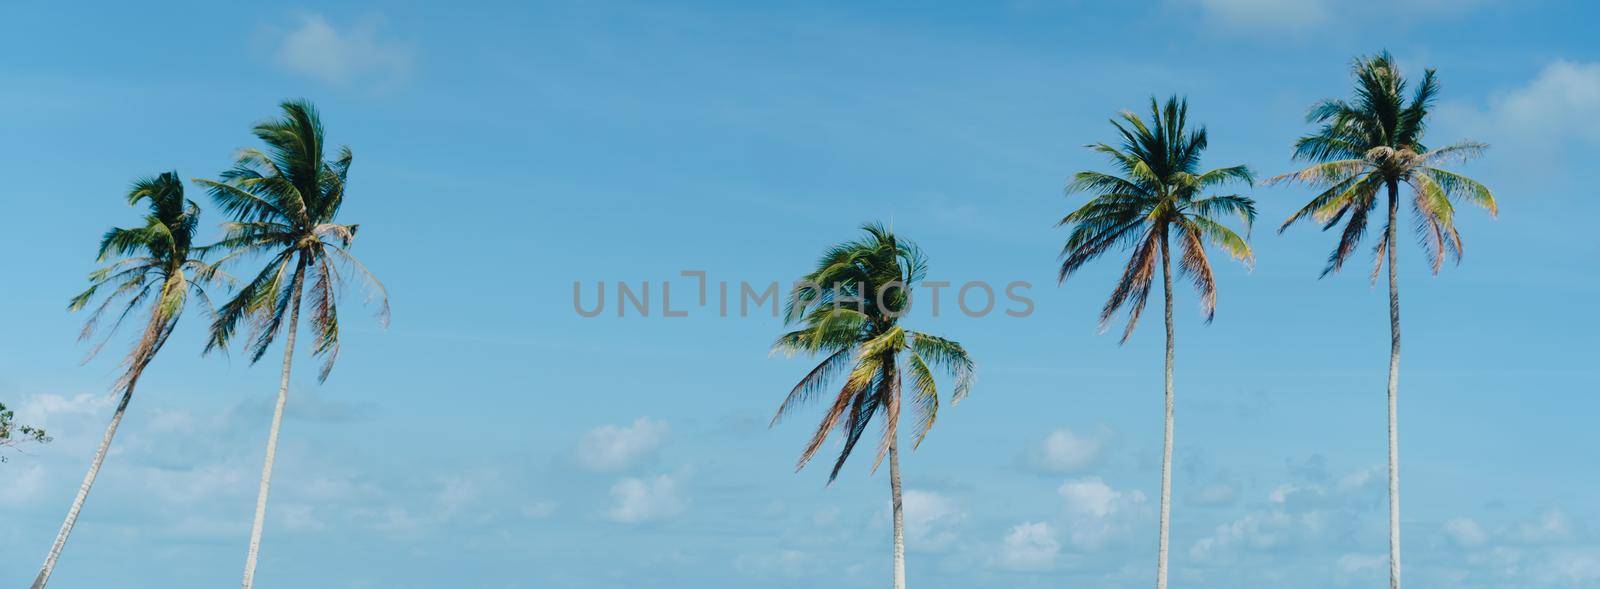 Minimal tropical coconut palm tree in summer with sky background. Copyspace you can put text on.  by Suwant